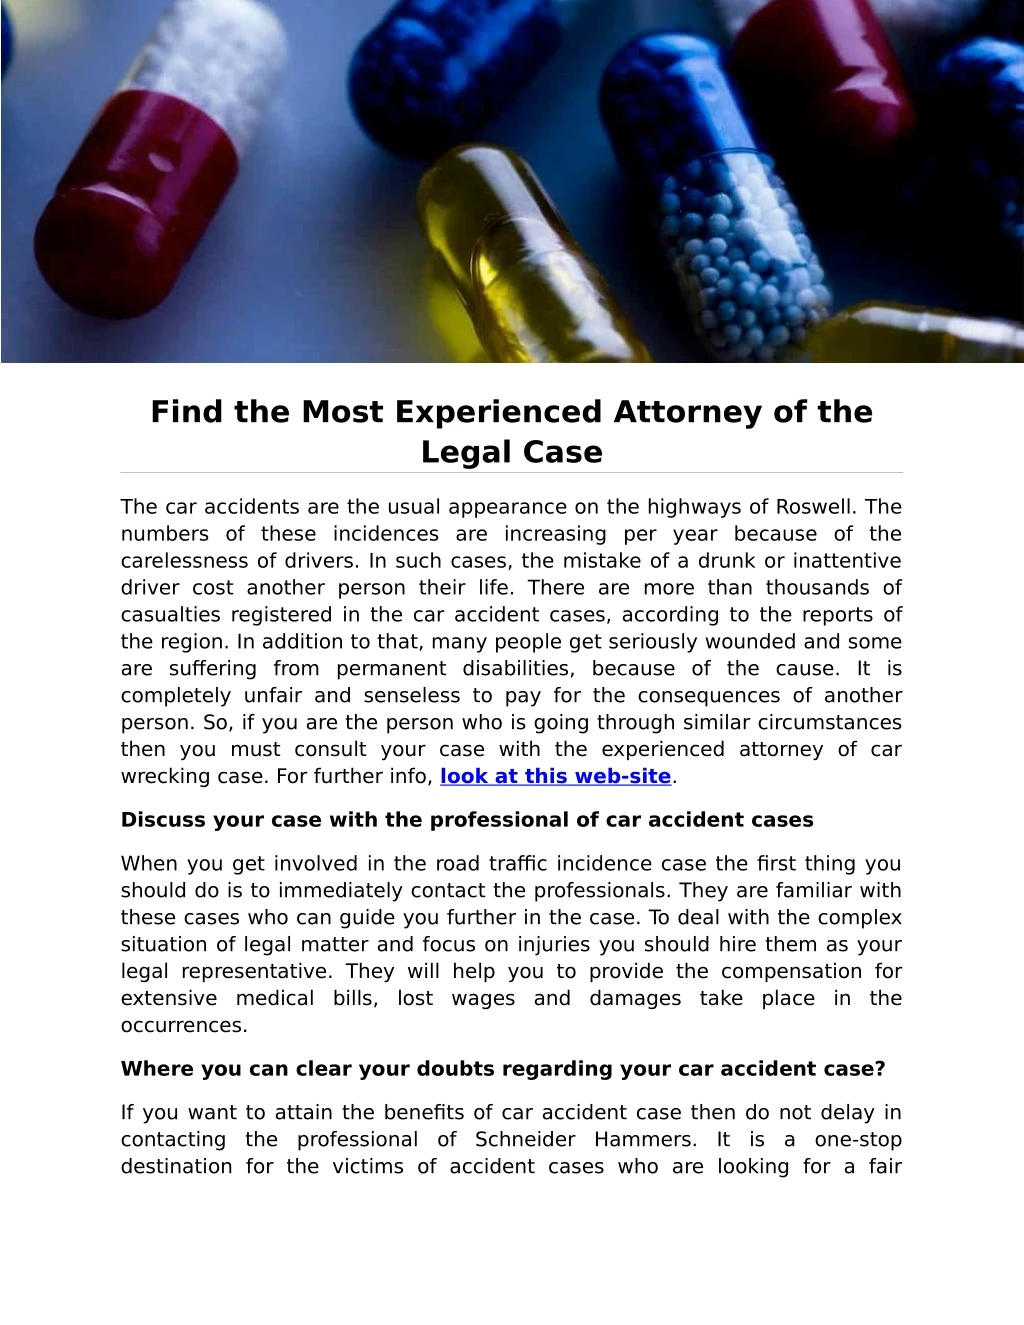 find the most experienced attorney of the legal